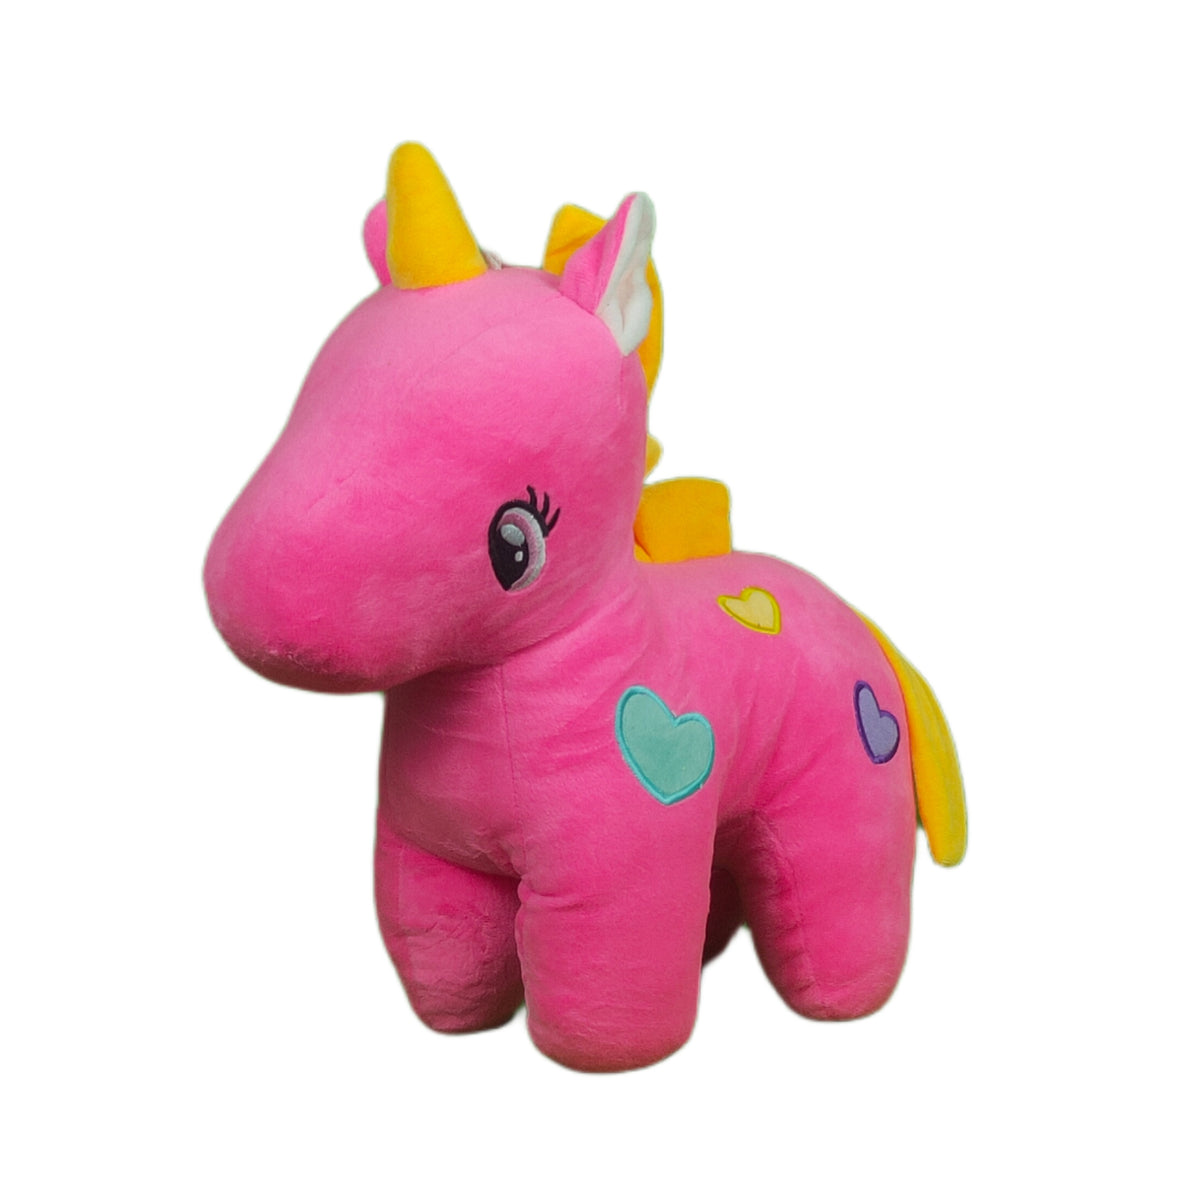 Play Hour Fairy Unicorn Plush Soft Toy For Ages 3 Years And Up - Pink, 40cm